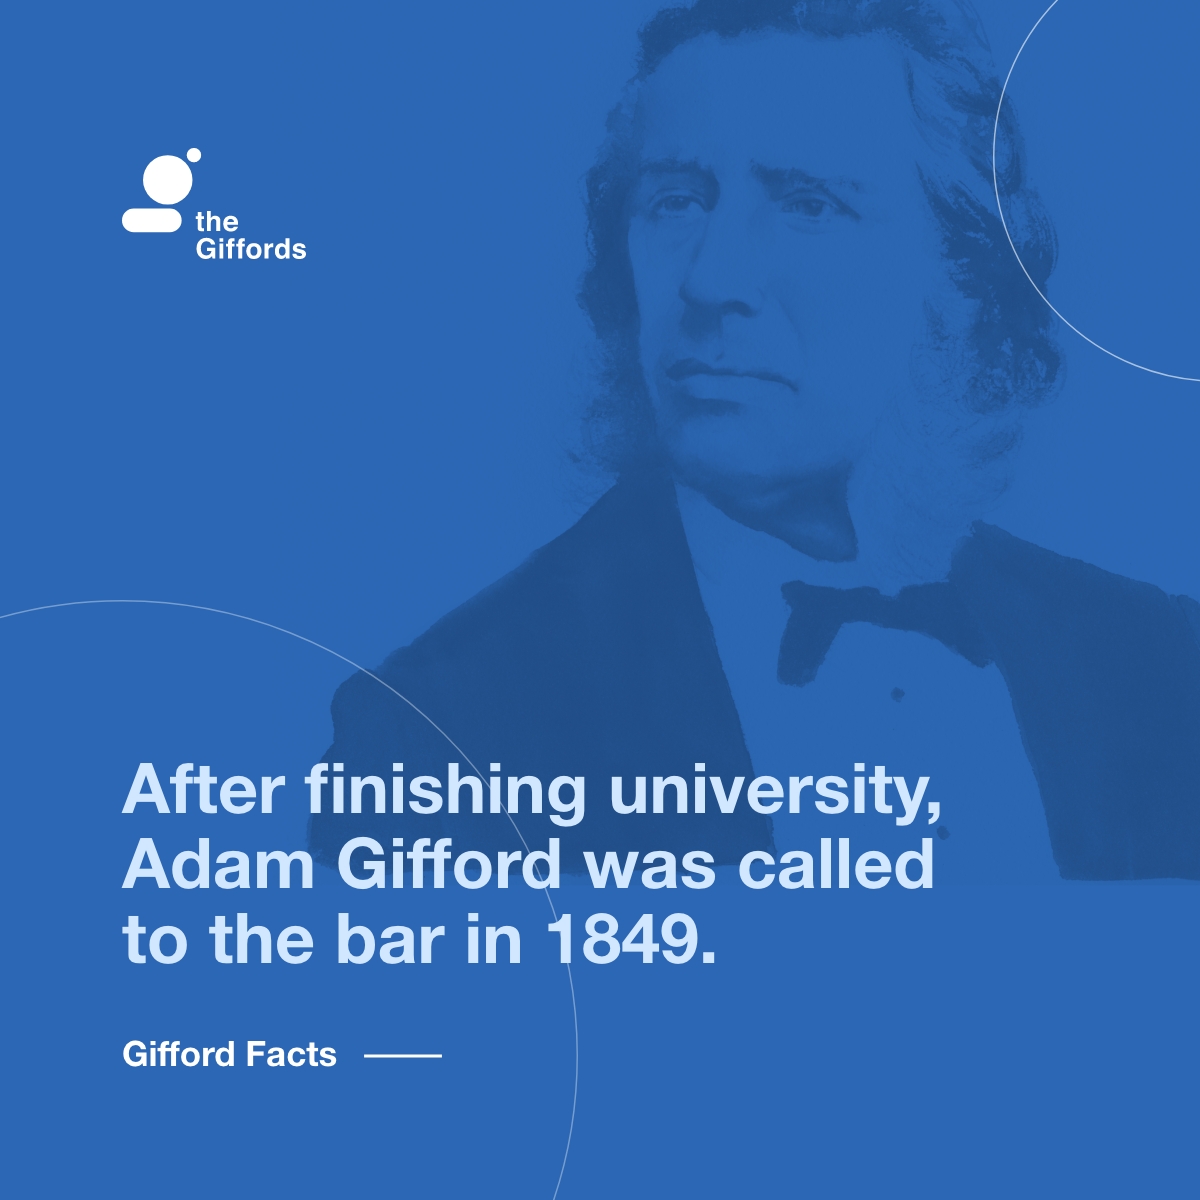 Did you know that the term 'bar exam' originates from the literal meaning of 'bar' as a physical divider in courtrooms? #GiffordFacts